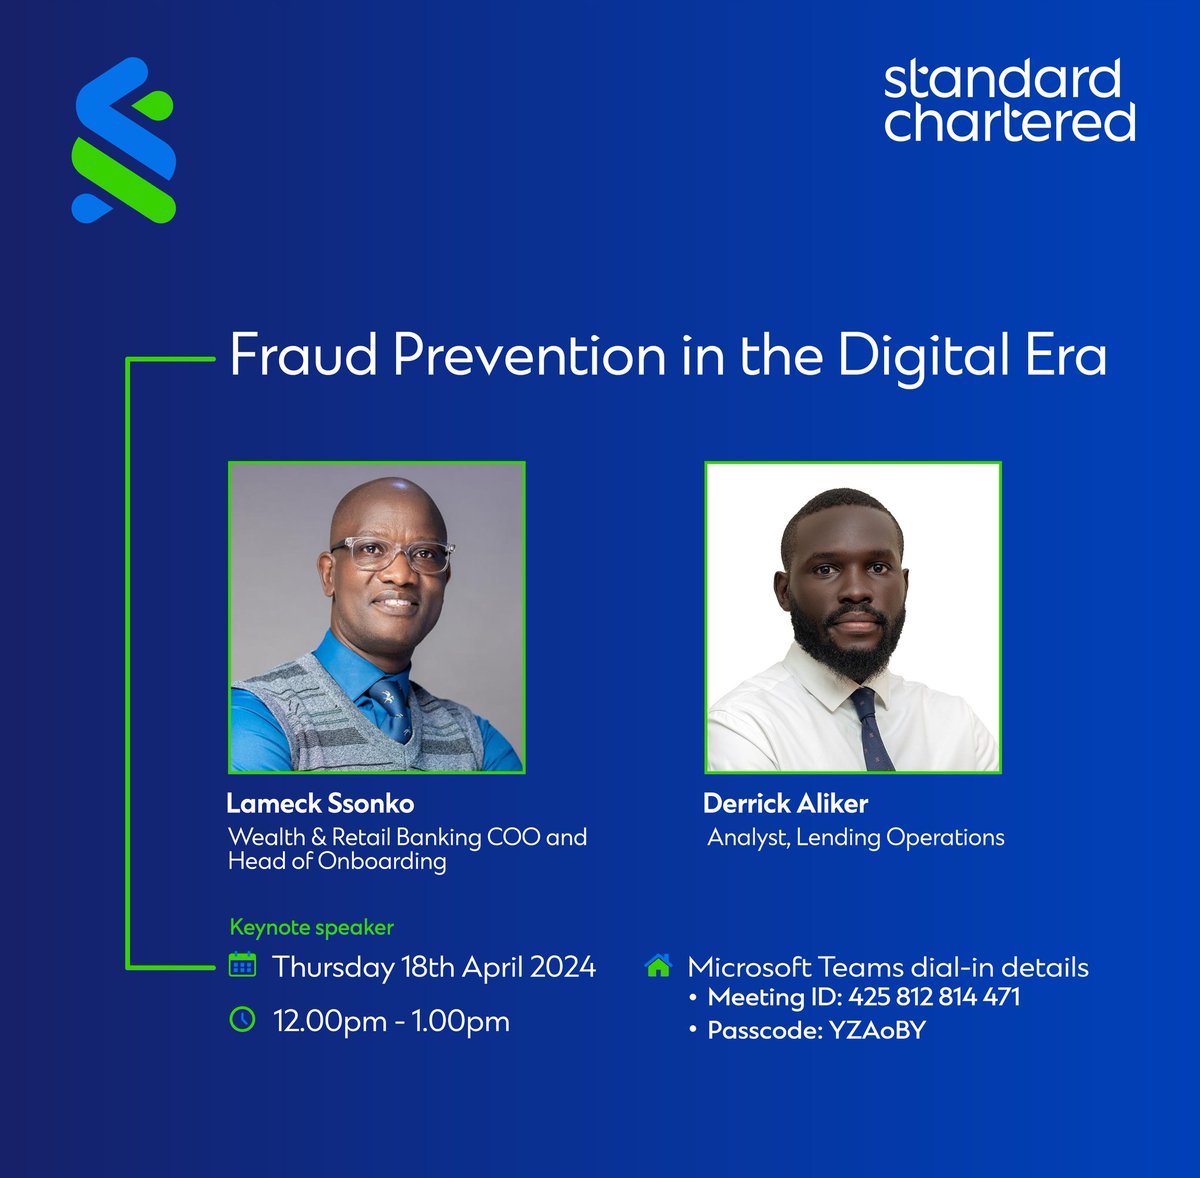 Get ahead of digital fraud and avoid being a victim of cyber related cases. 🔊 Join @StanChartUGA this Thursday between 12pm - 1pm on a webinar that will put emphasis on curbing digital fraud. Webinar details are on the flyer. #HereForGood